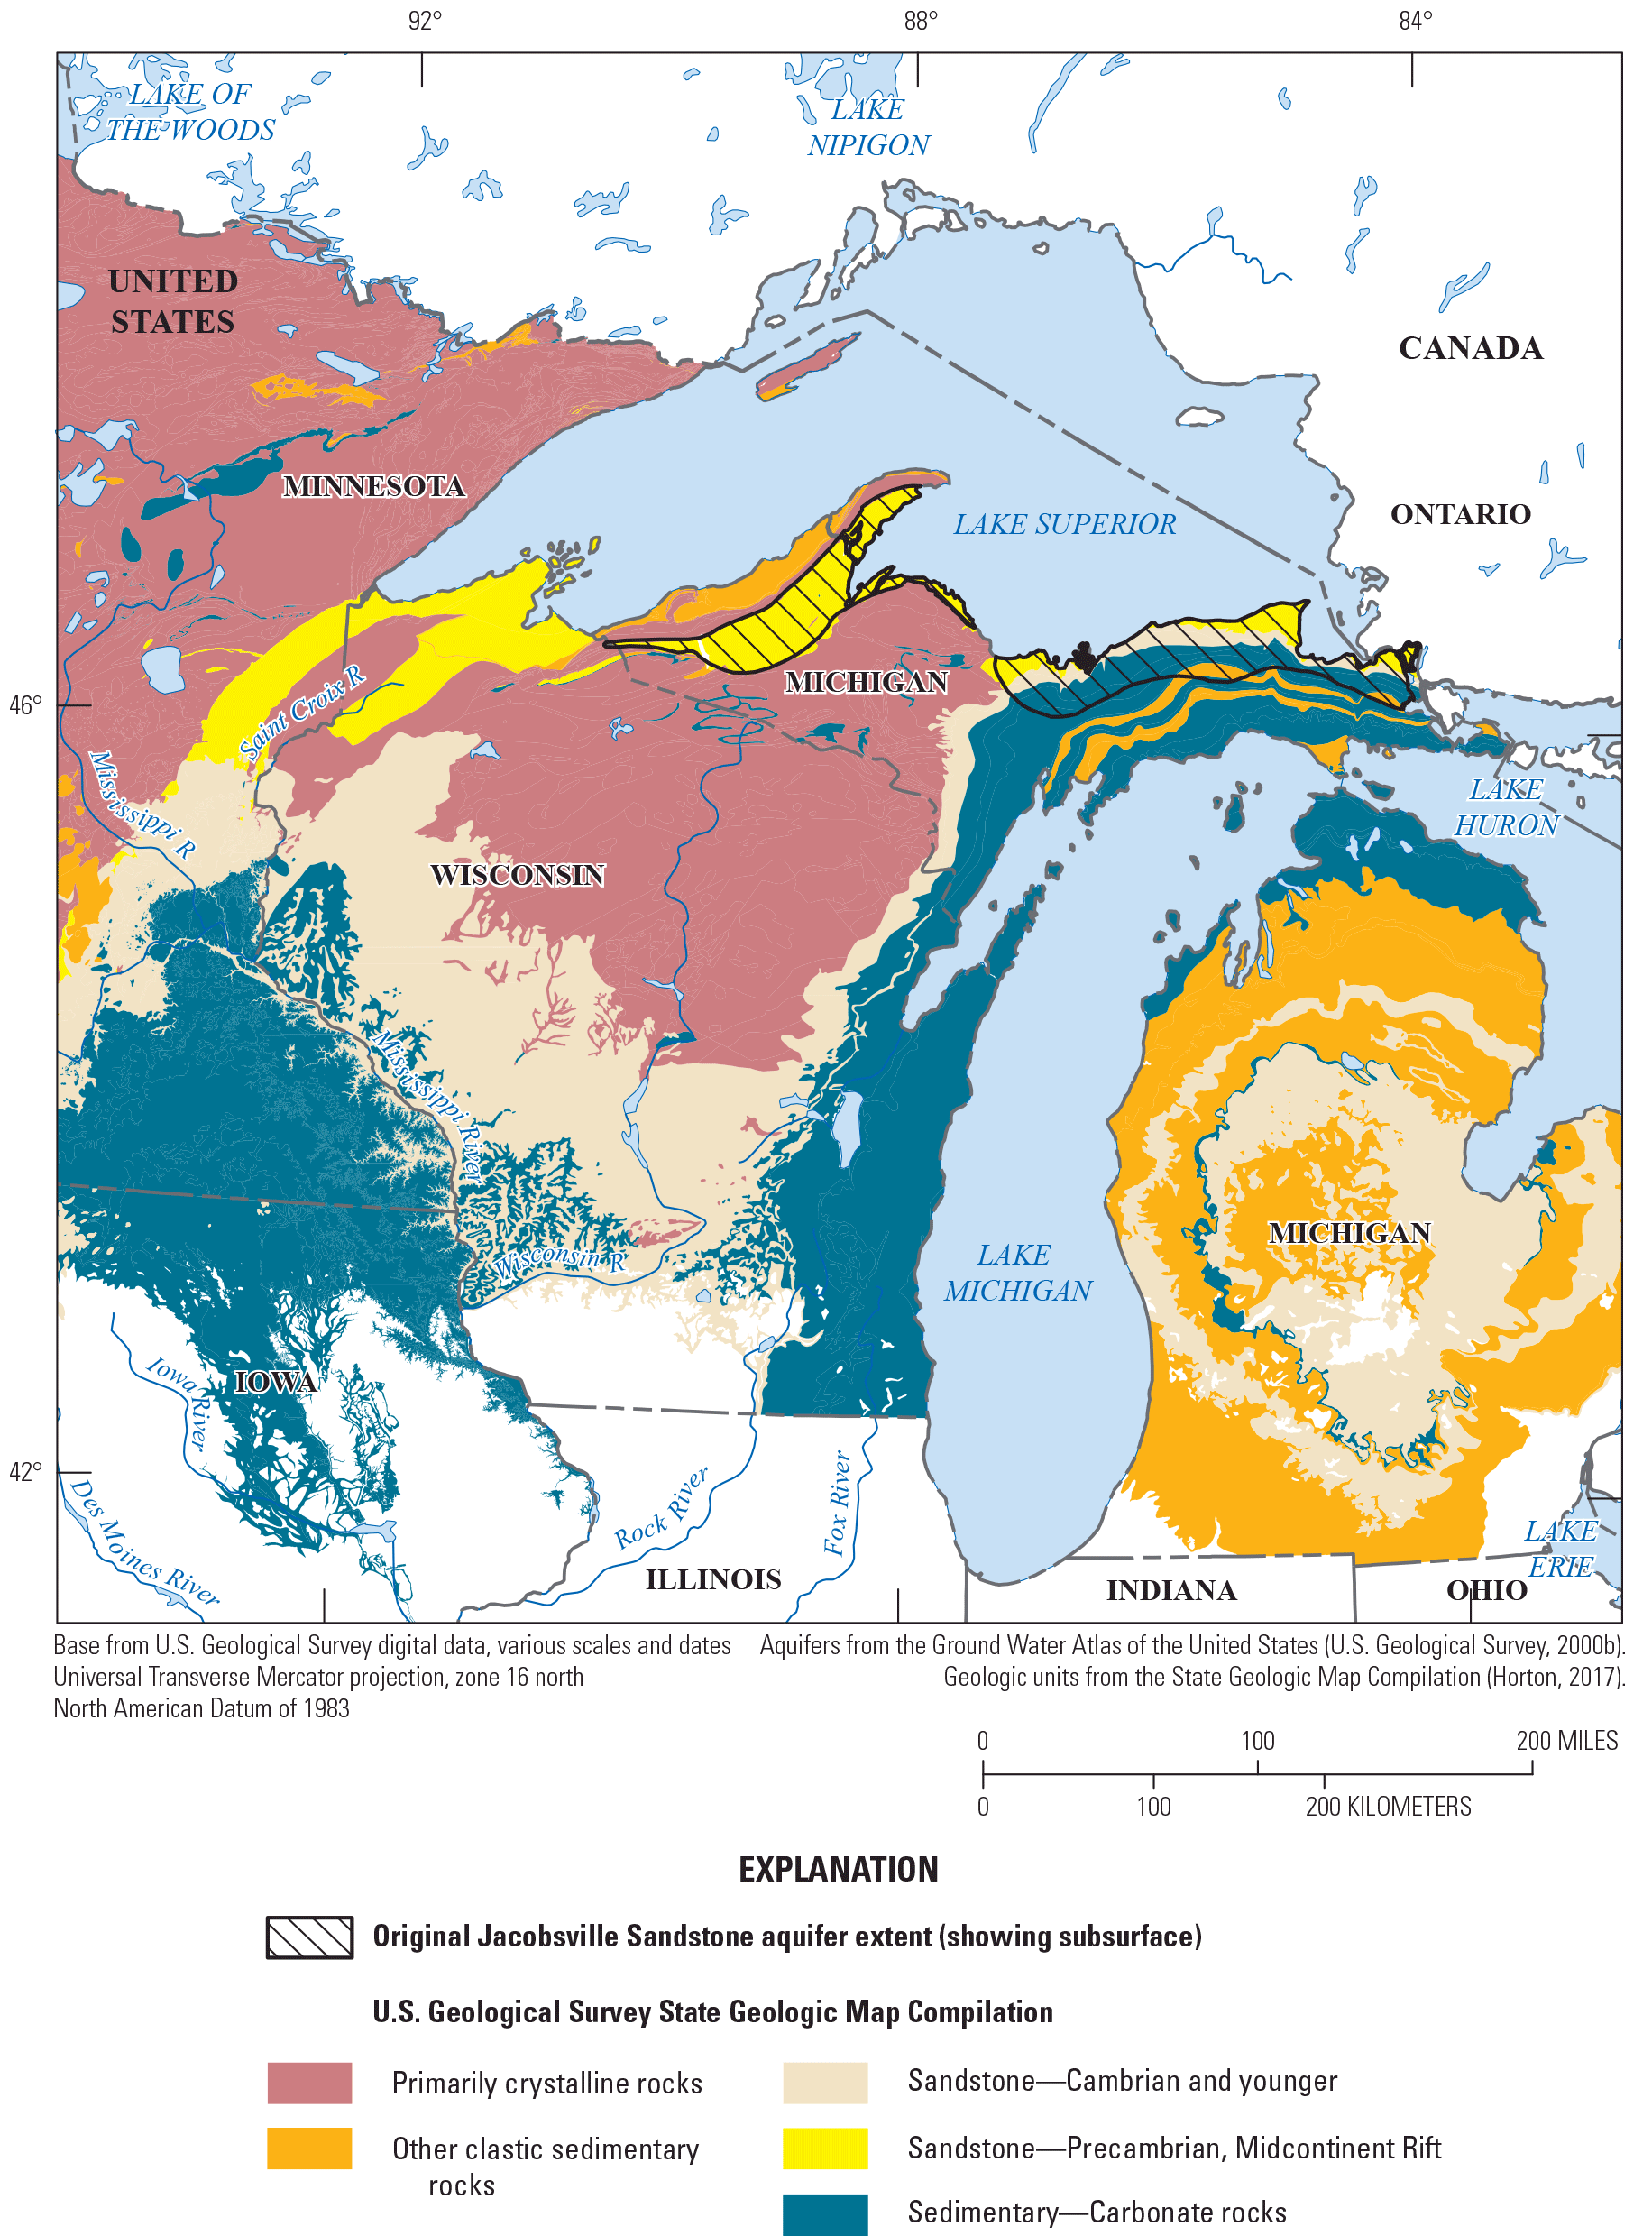 The rock types in Minnesota, Wisconsin, and Michigan, that highlights the locations
                        of sandstones inside and outside the original boundary of the Jacobsville aquifer.